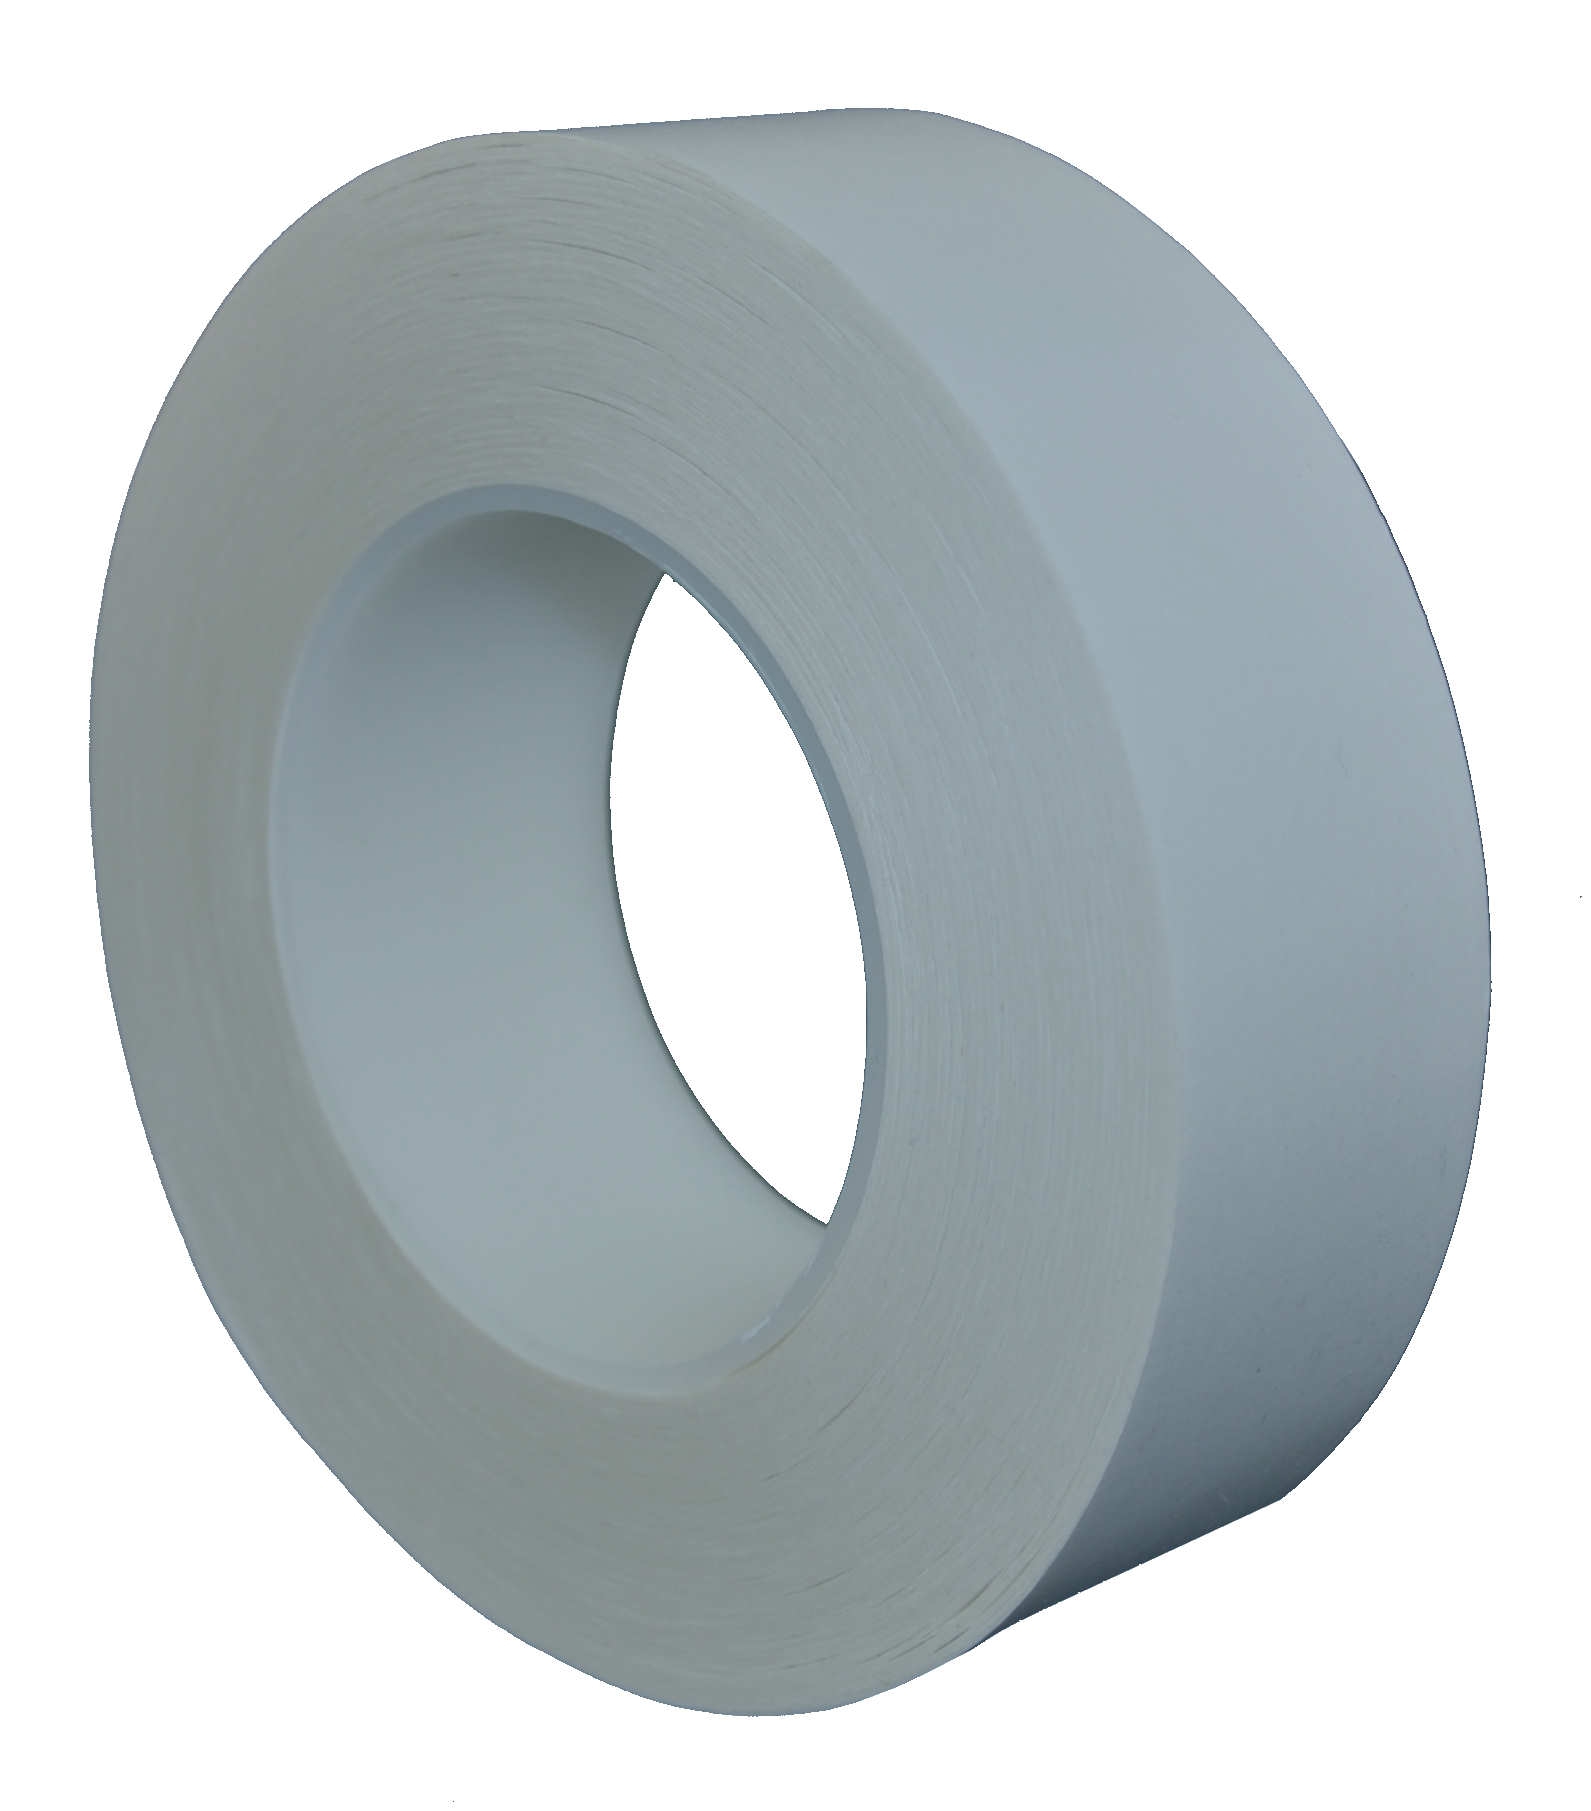 S-K-S double-sided adhesive tape with polyester backing 480, transparent, 50 mm x 50 m, 0.09 mm